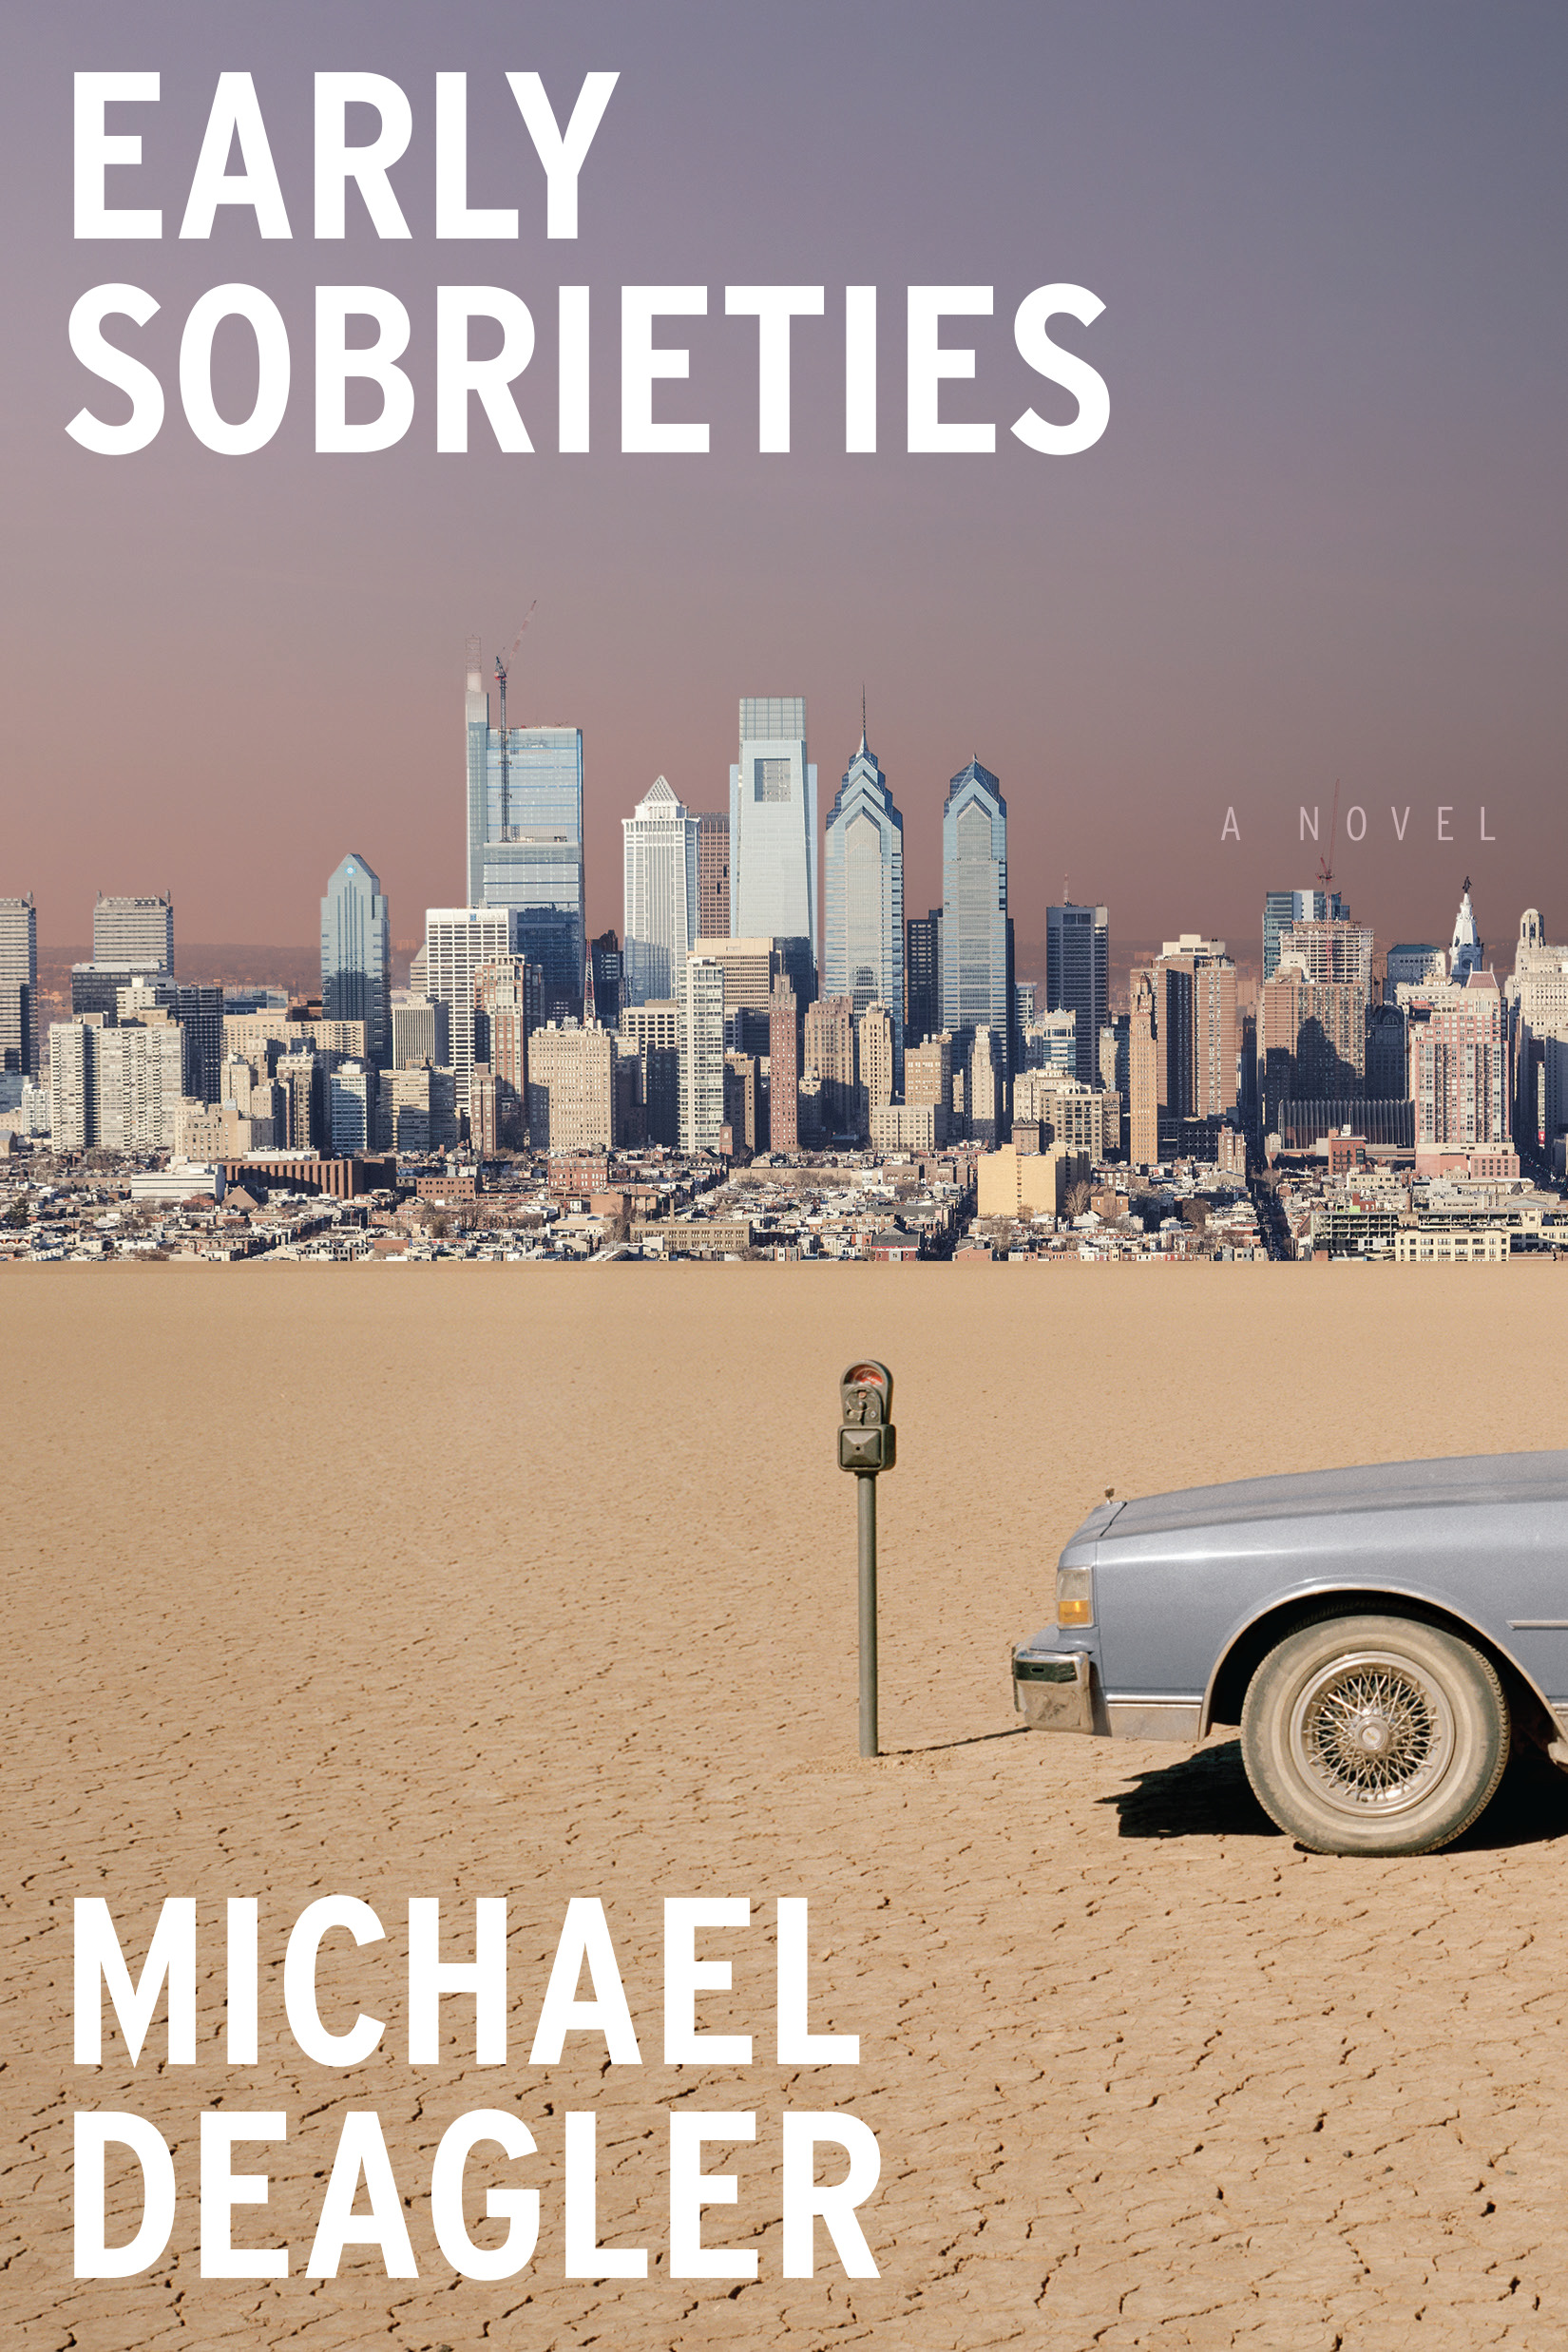 Book Launch: Early Sobrieties by Michael Deagler in conversation with Paul Lisicky @ powerHouse on 8th